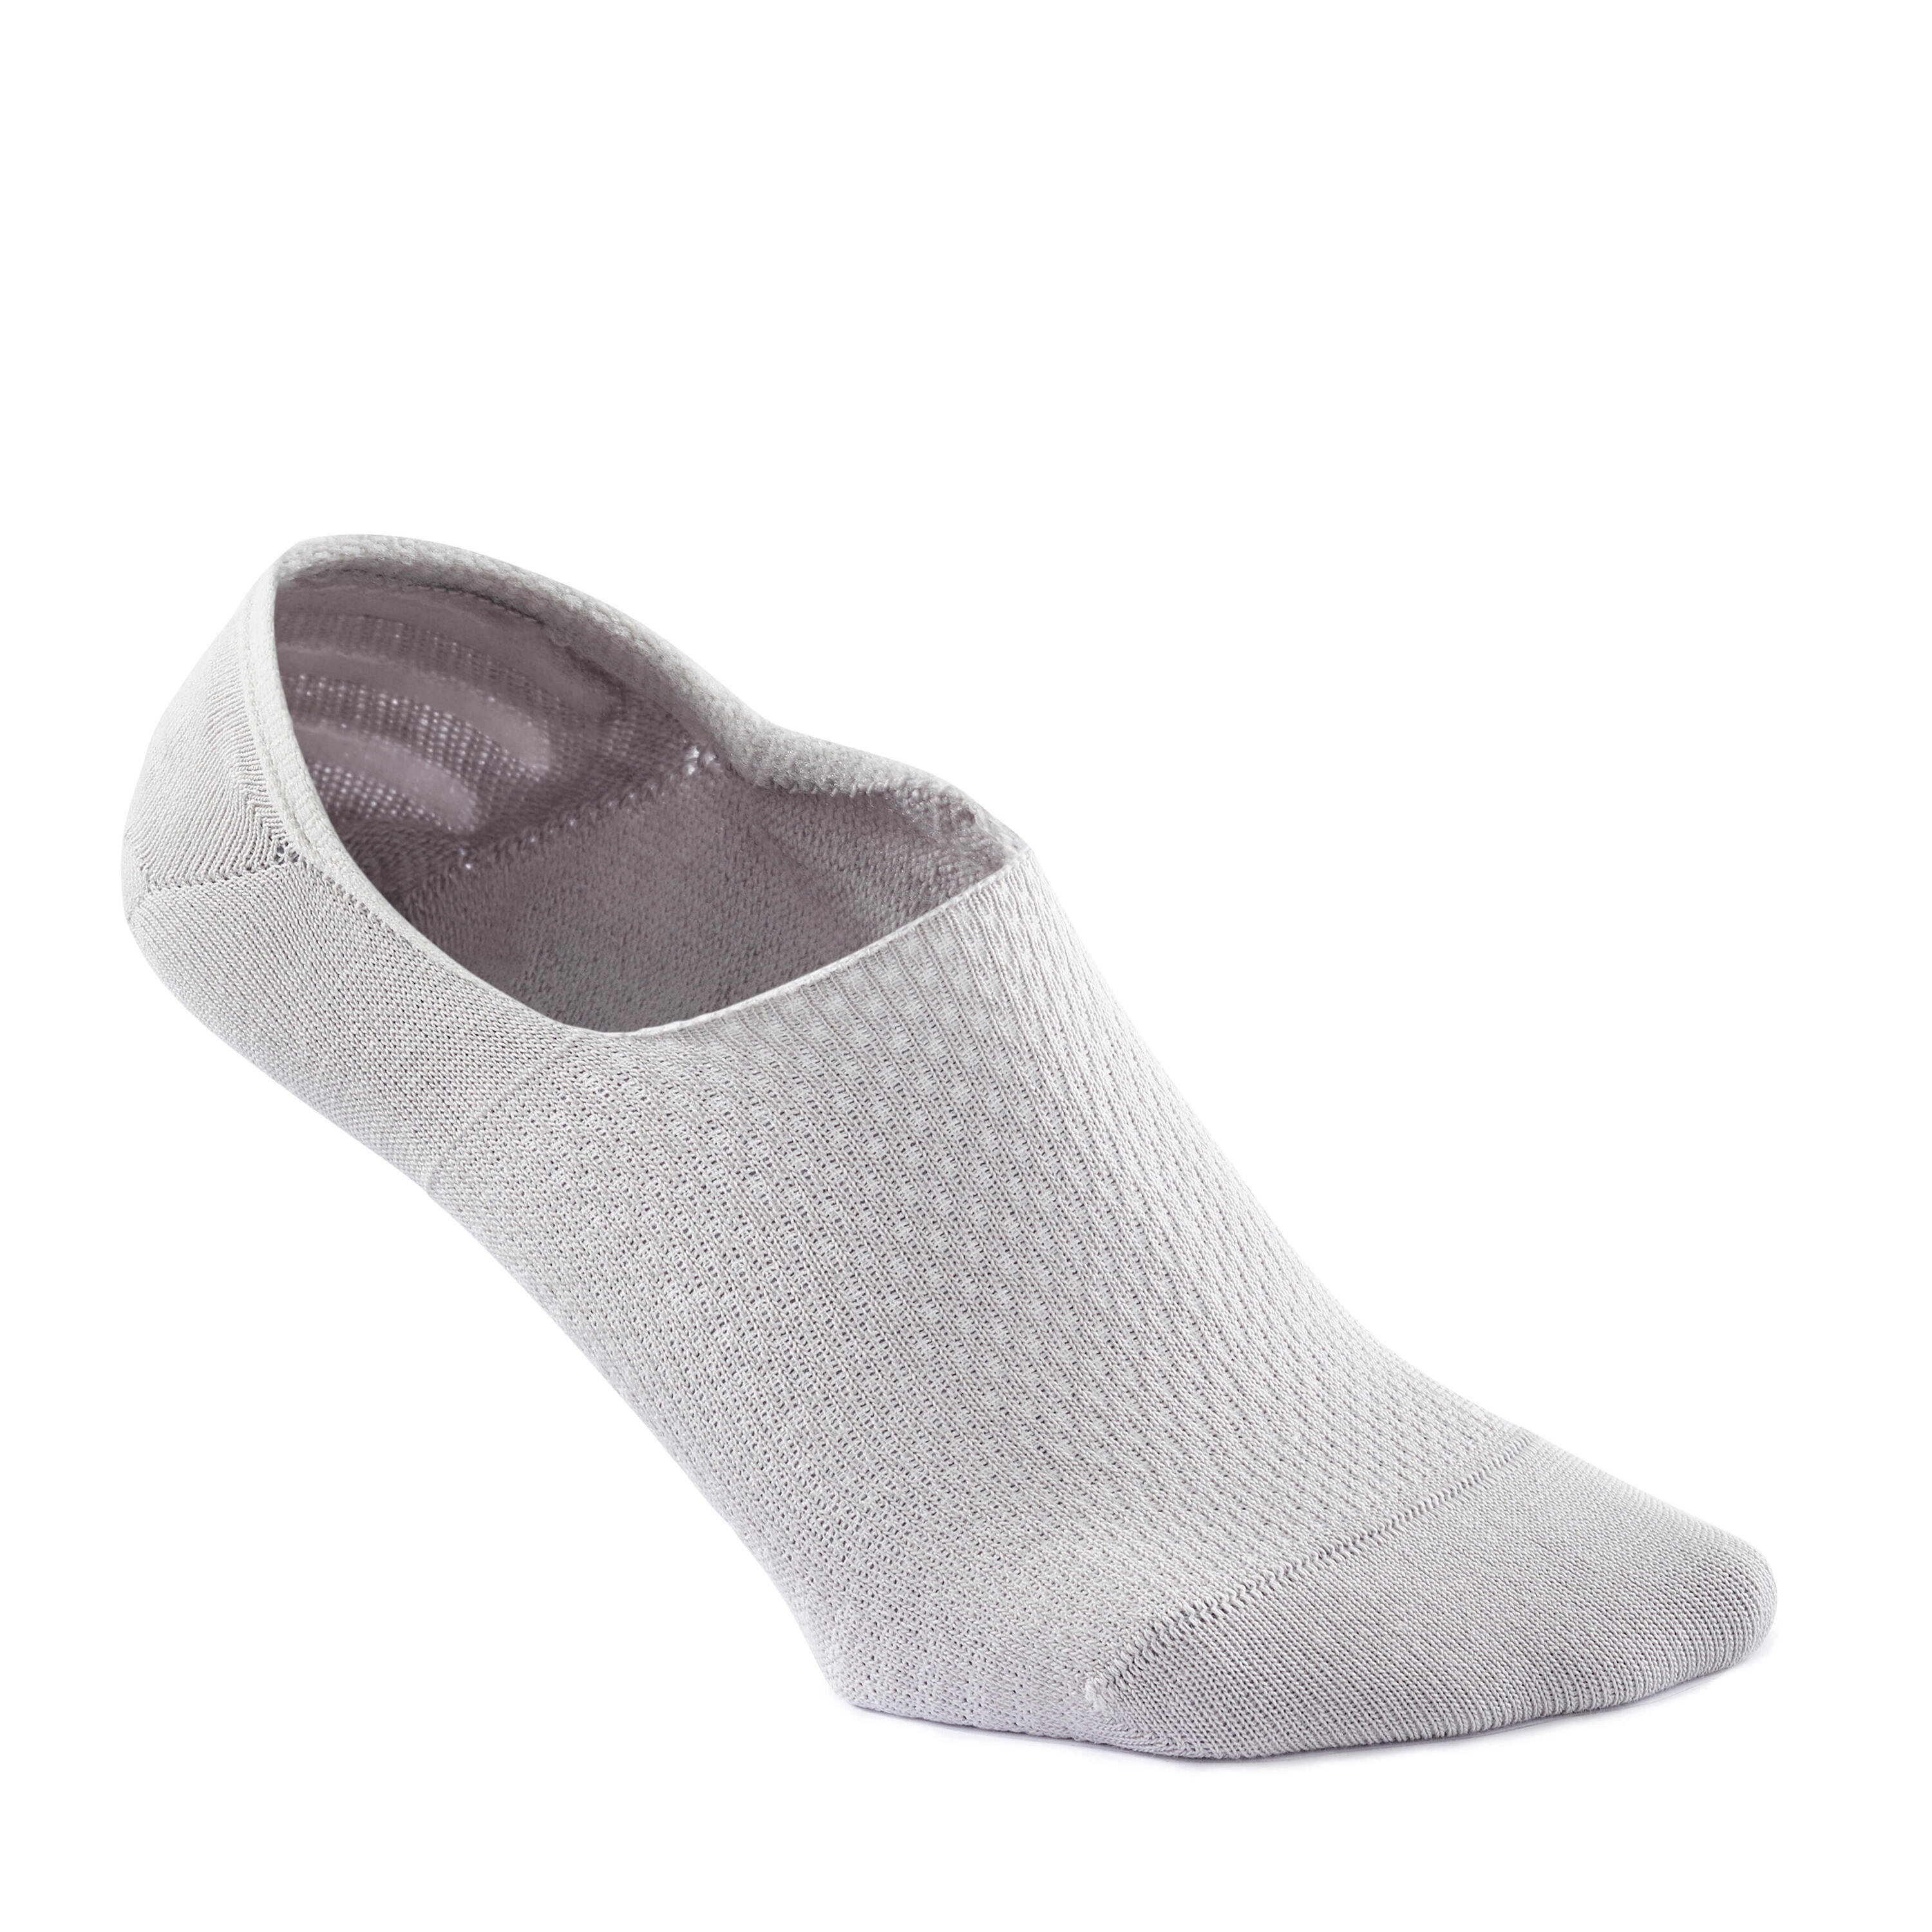 Invisible walking socks - pack of 2 pairs - white/grey 2/9